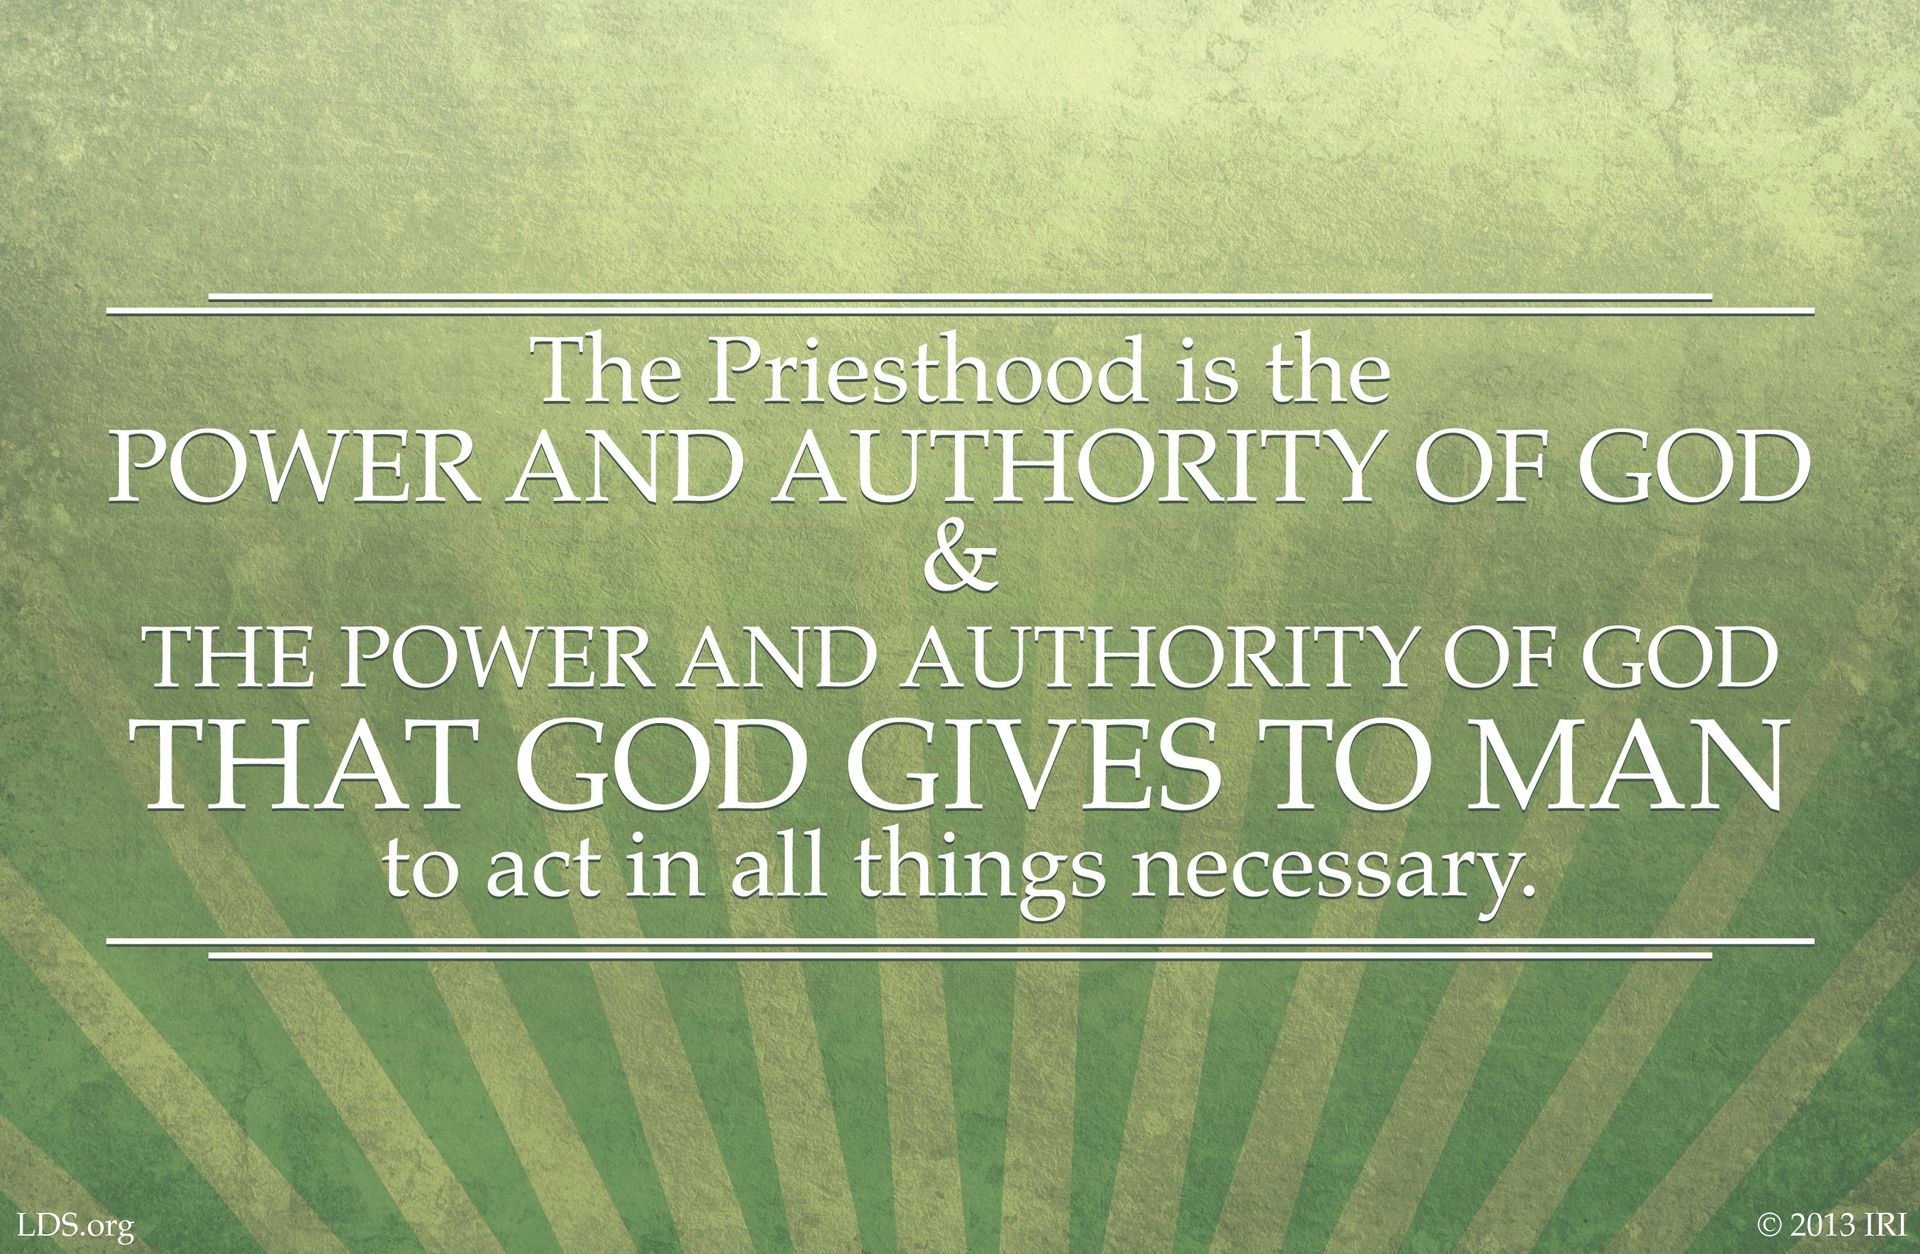 “The priesthood is the power and authority of God and the power and authority of God that God gives to man to act in all things necessary.”—See Handbook 2: Administering the Church © undefined ipCode 1.